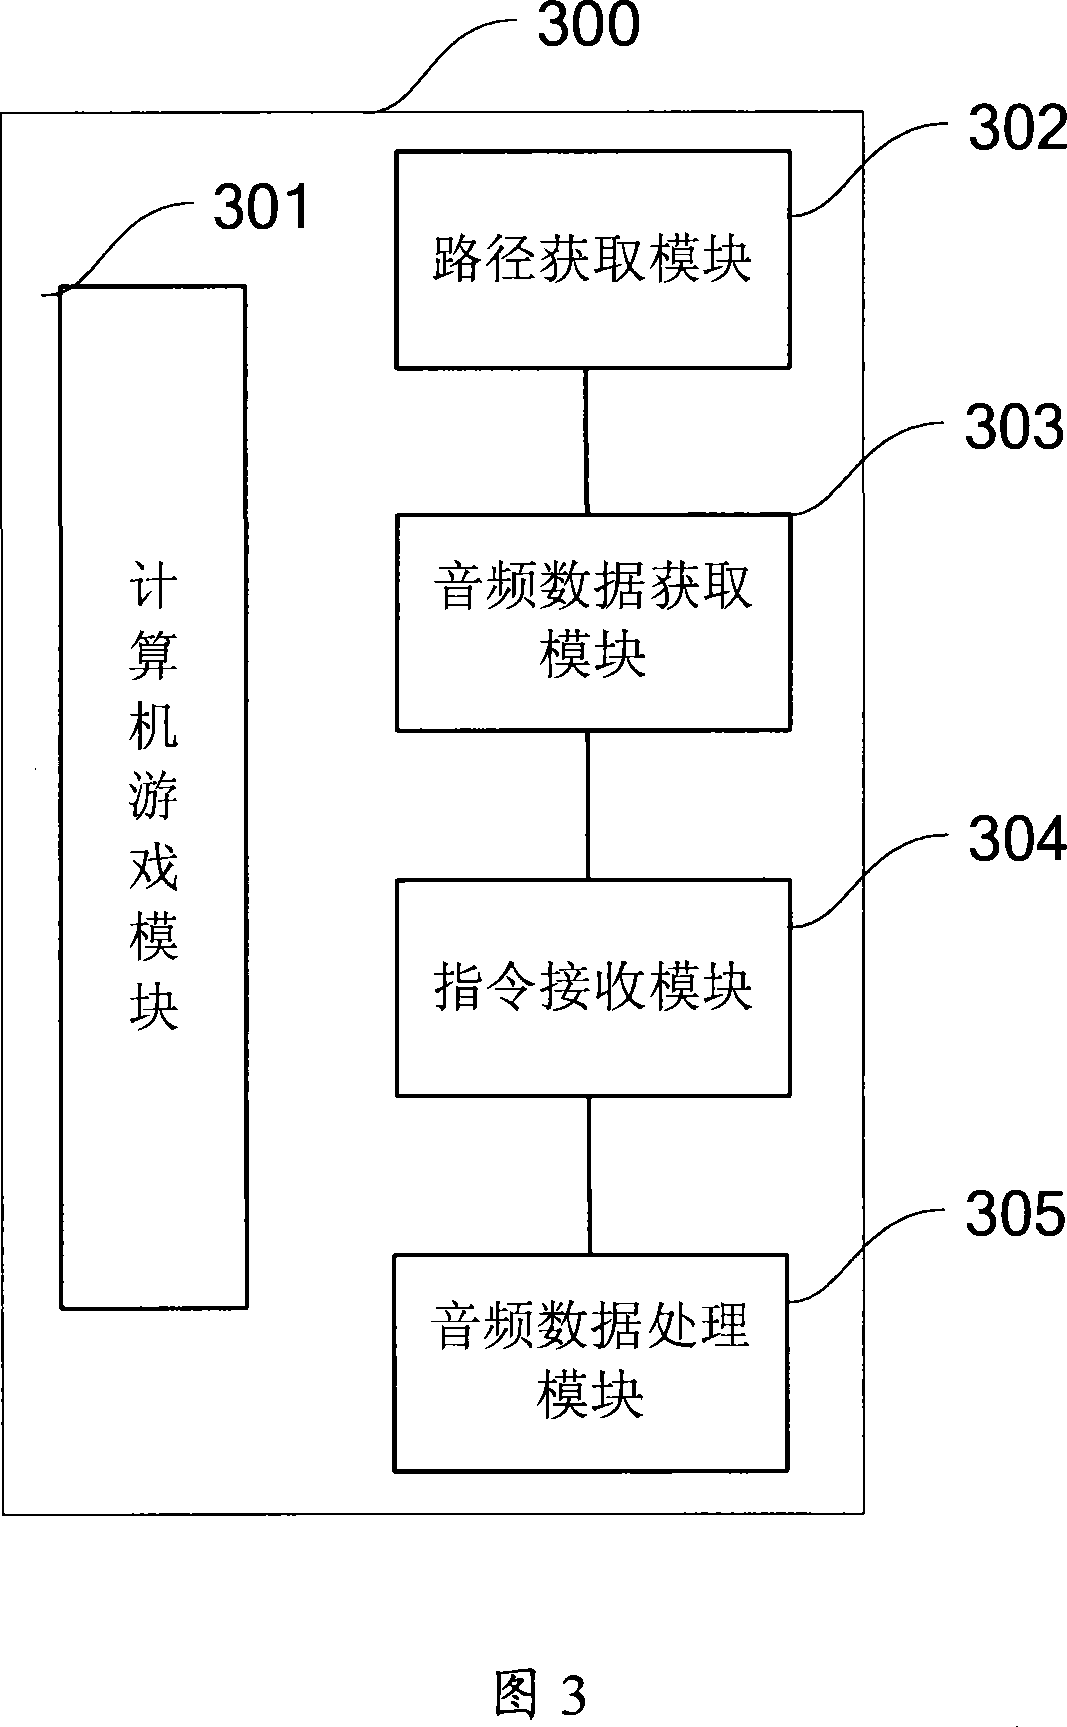 Method and system for processing audio data in computer game